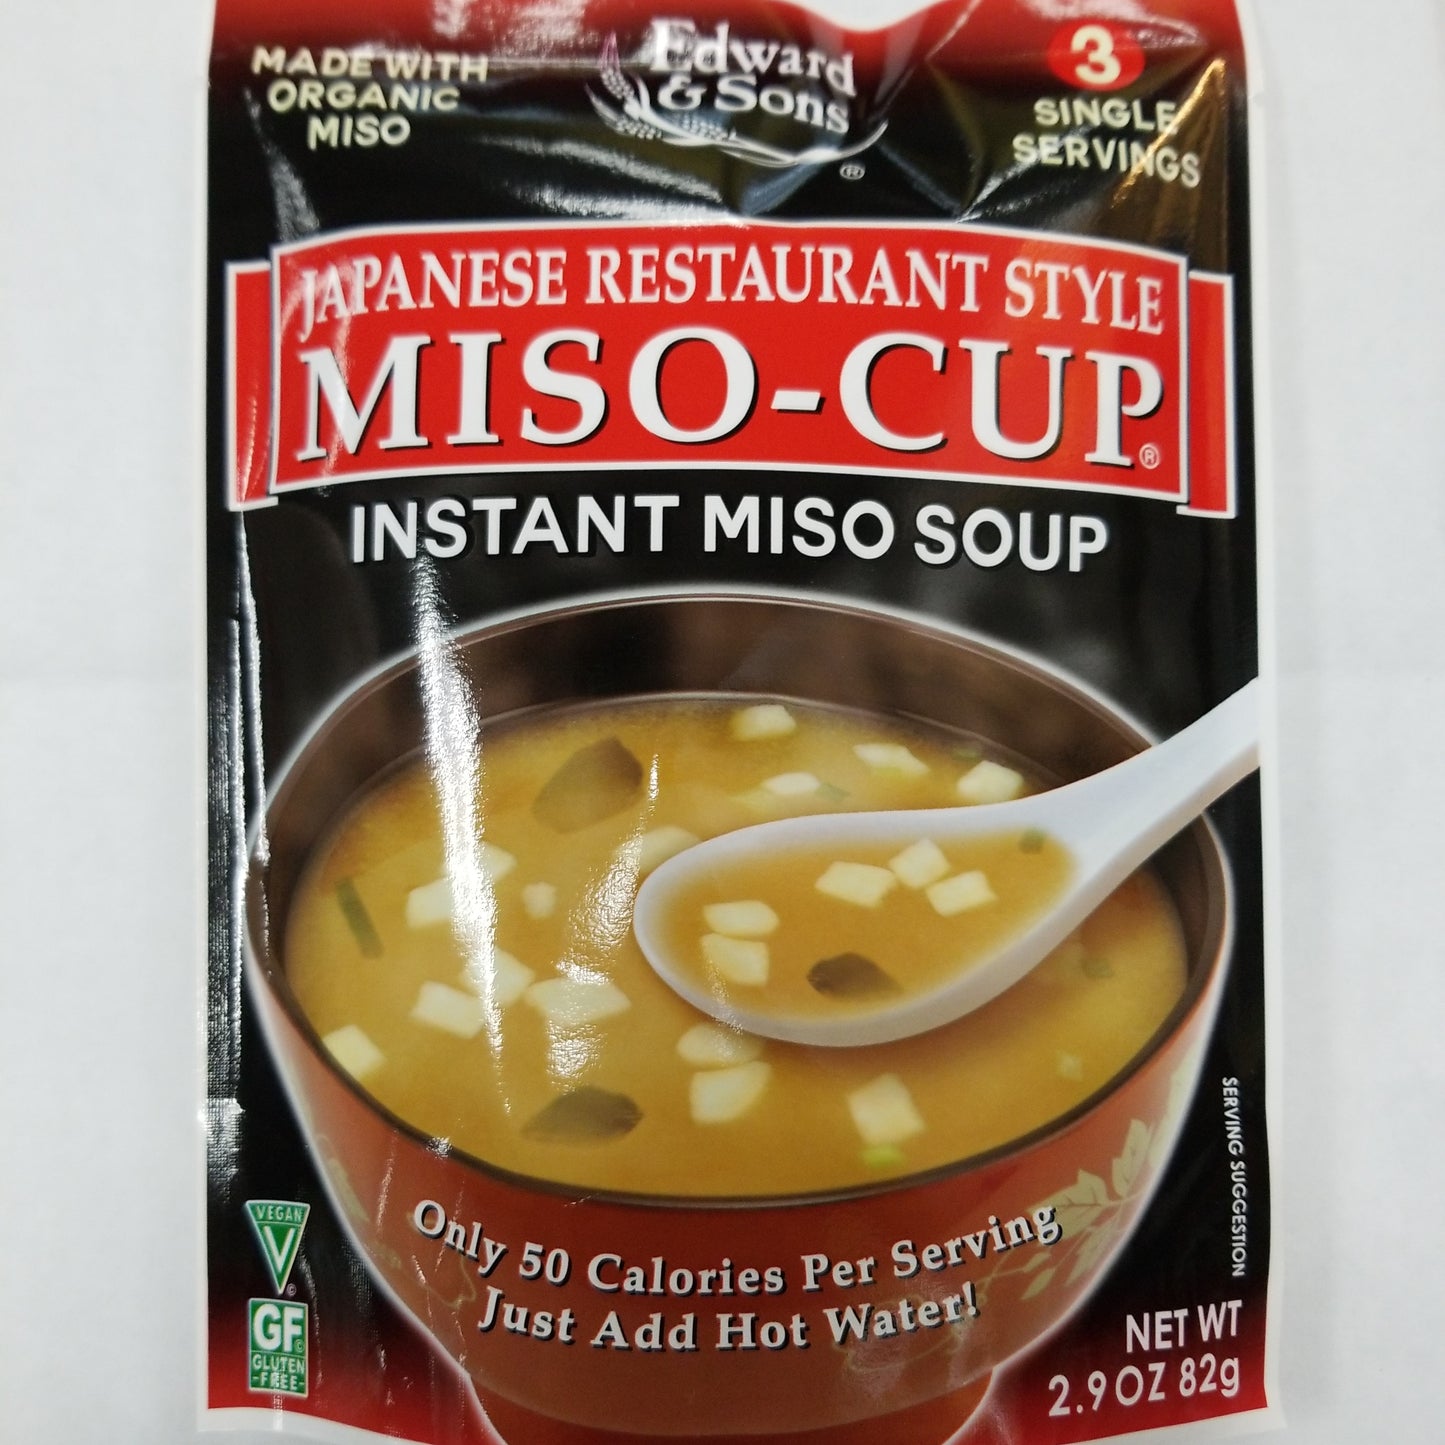 Edward & Sons Japanese Restaurant Style Miso-Cup Mix